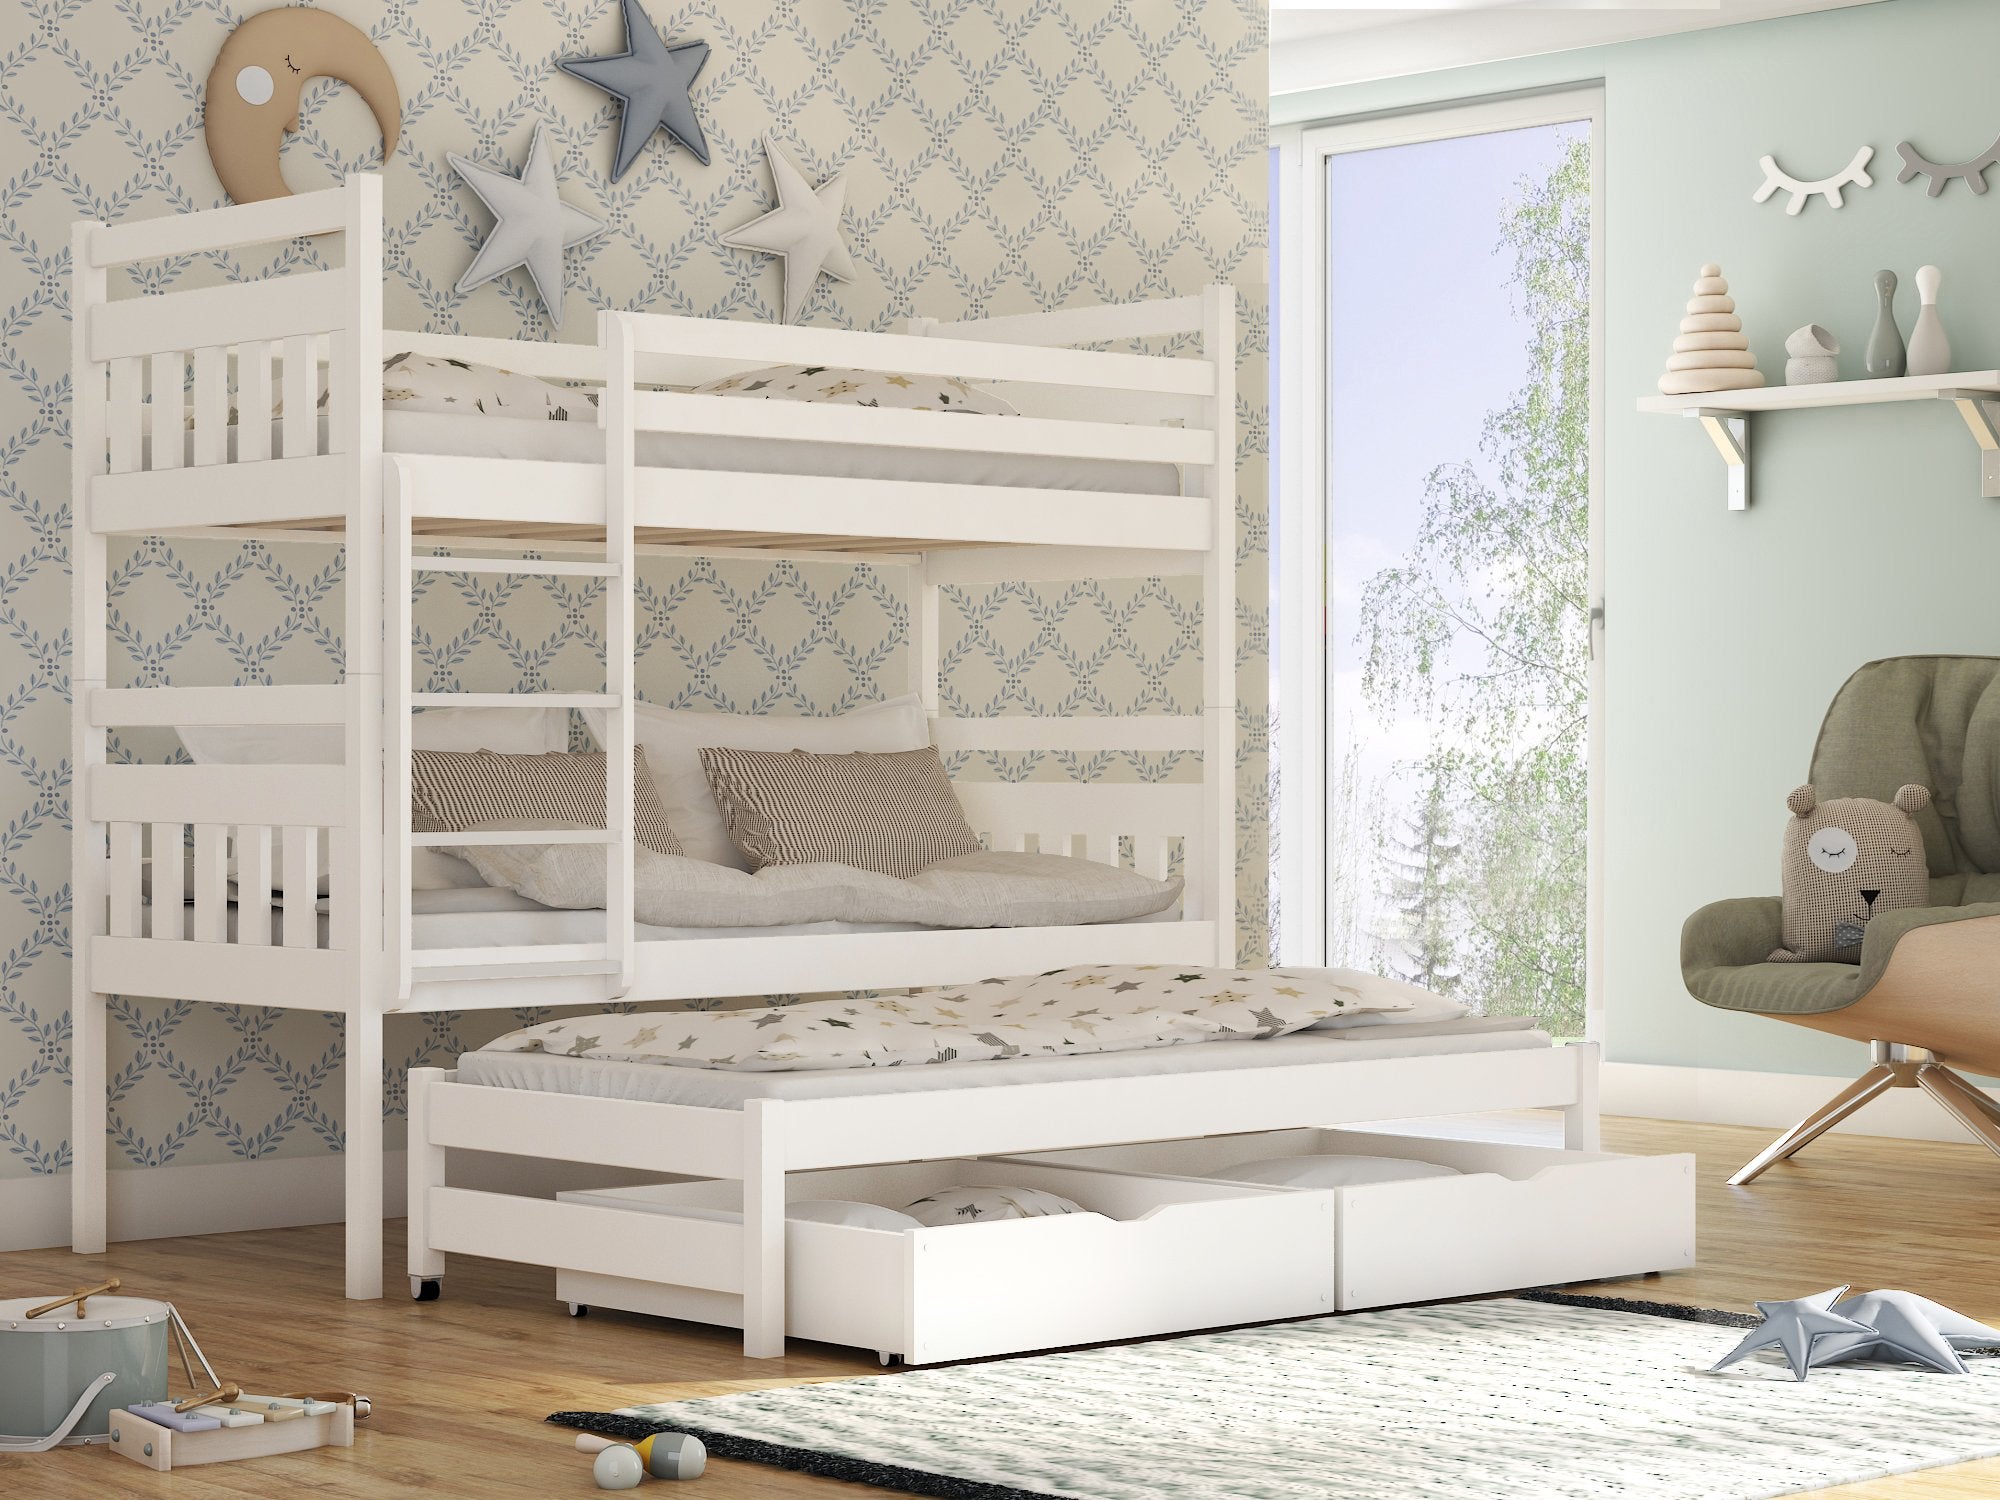 View Wooden Bunk Bed Seweryn with Trundle and Storage White Matt FoamBonnell Mattresses information